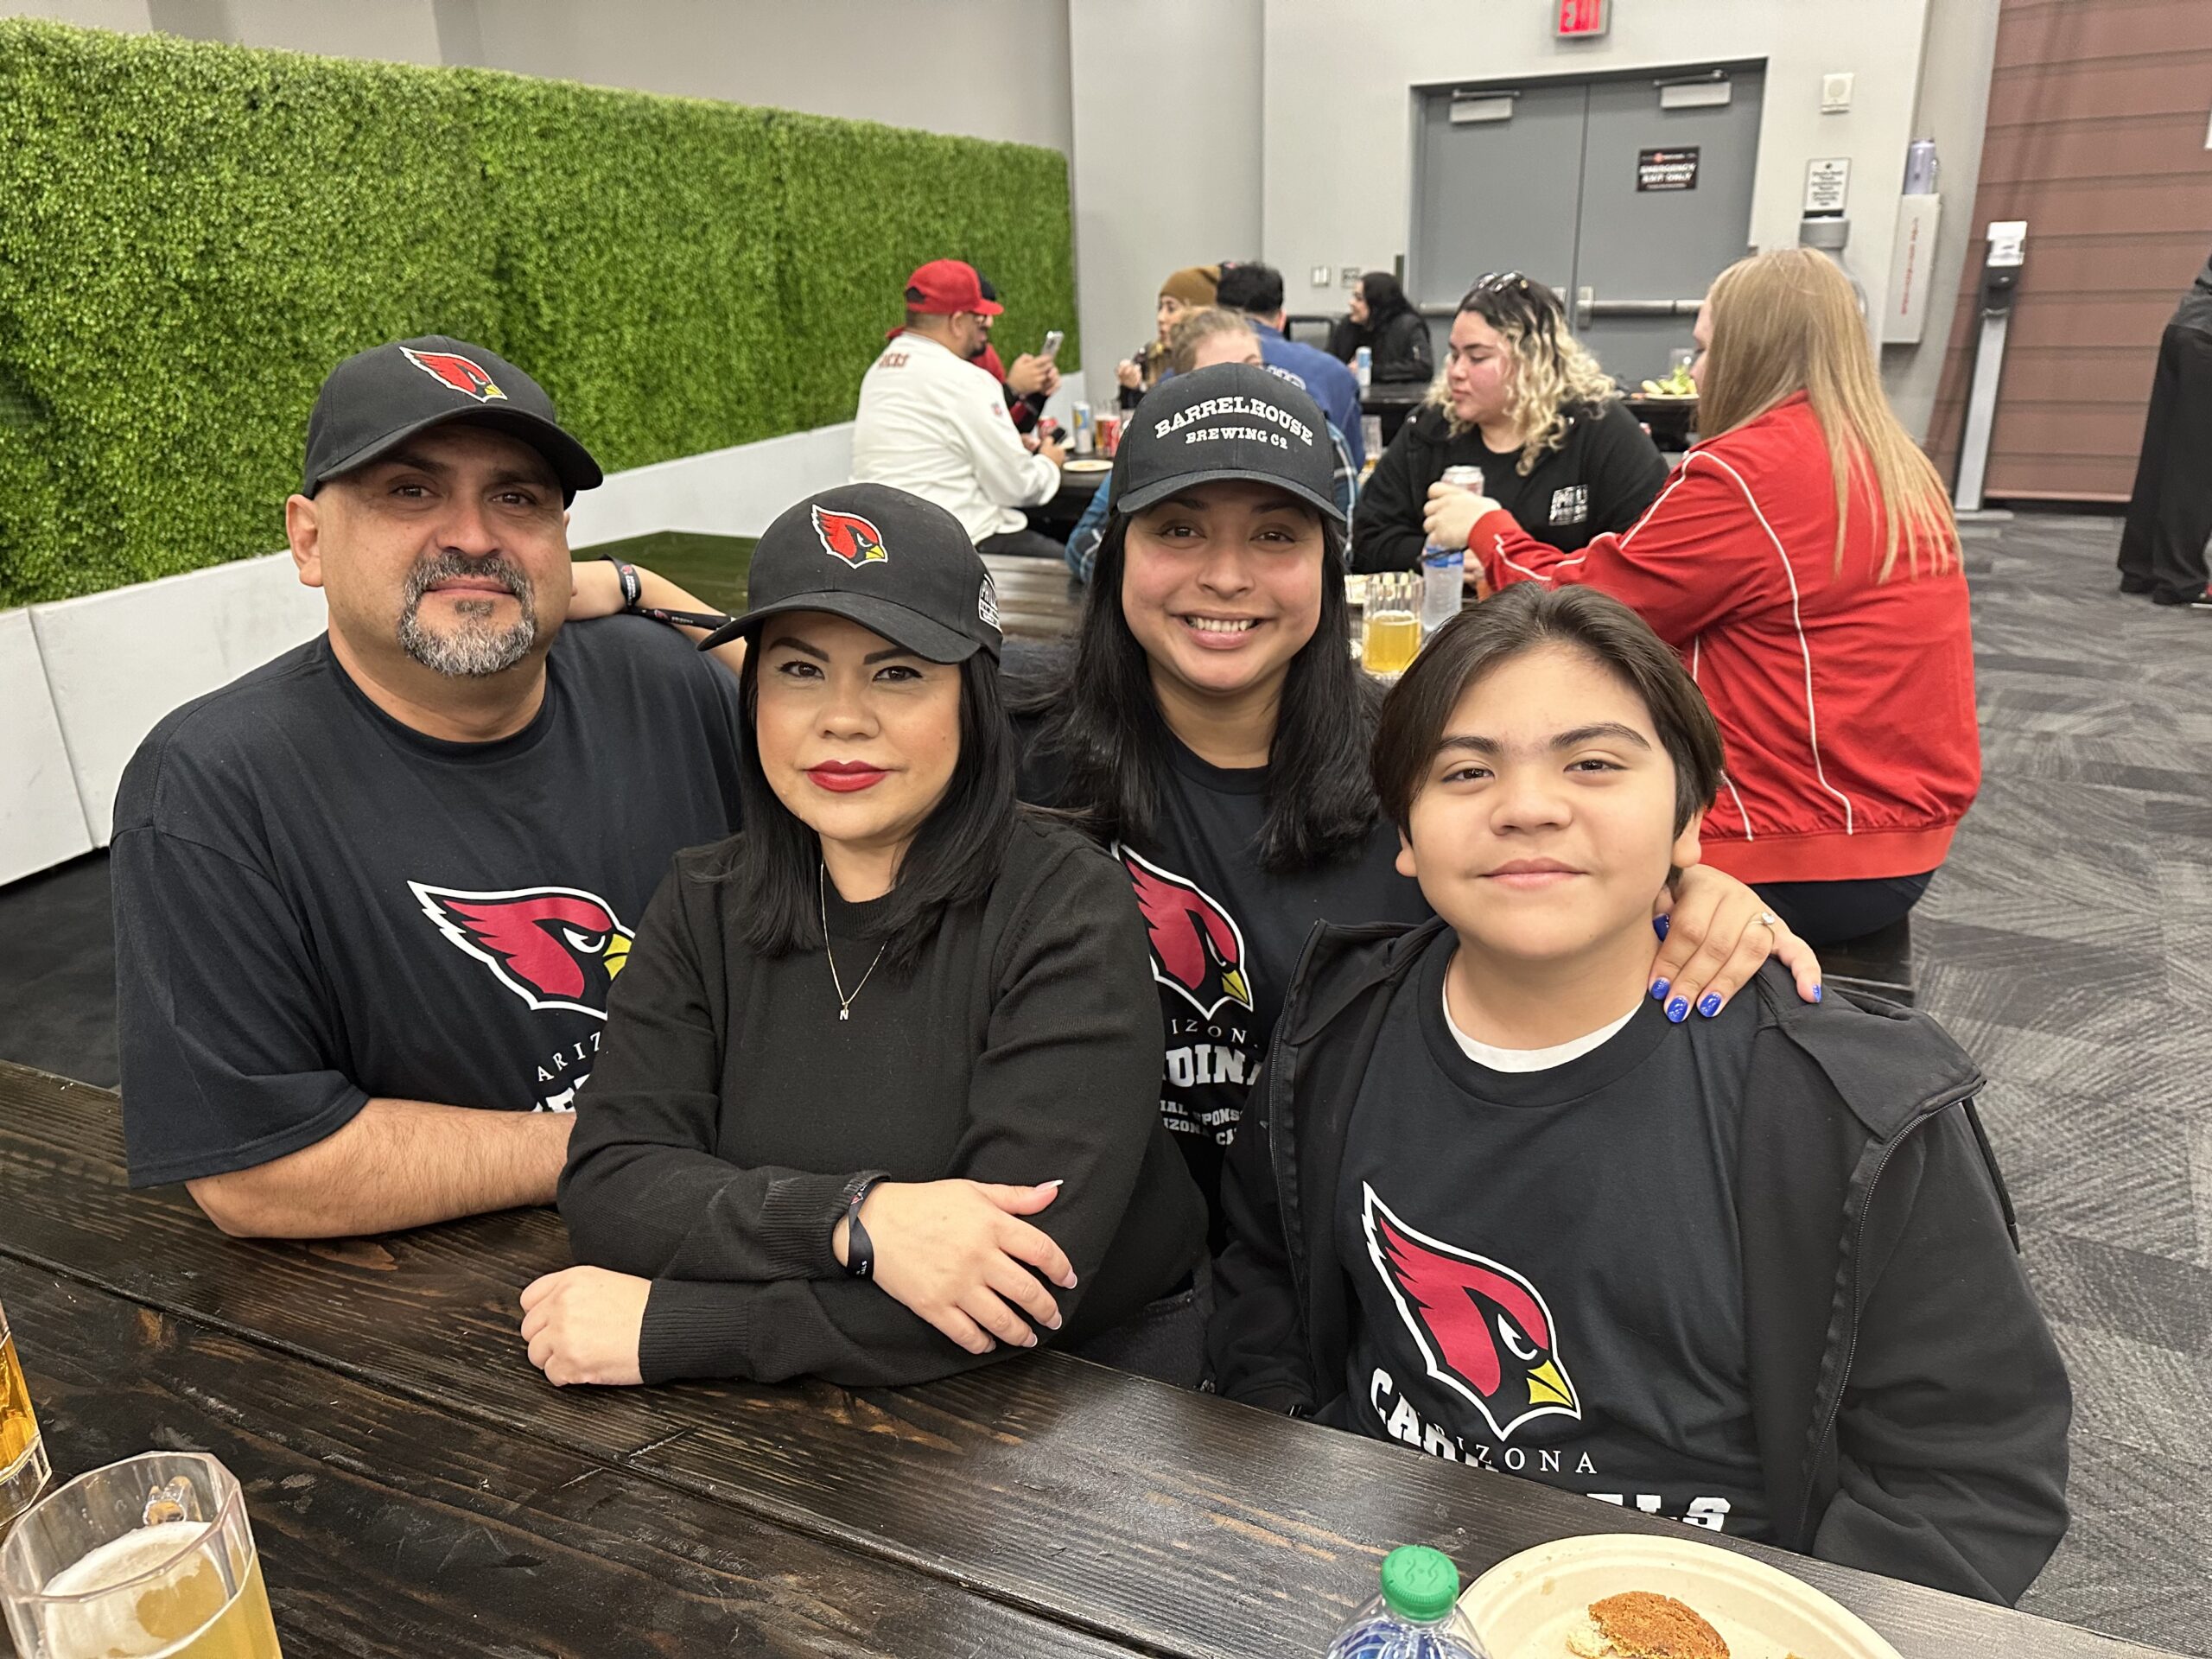 photo of phillips law group guests at nfl game for partnership with arizona cardinals blog post